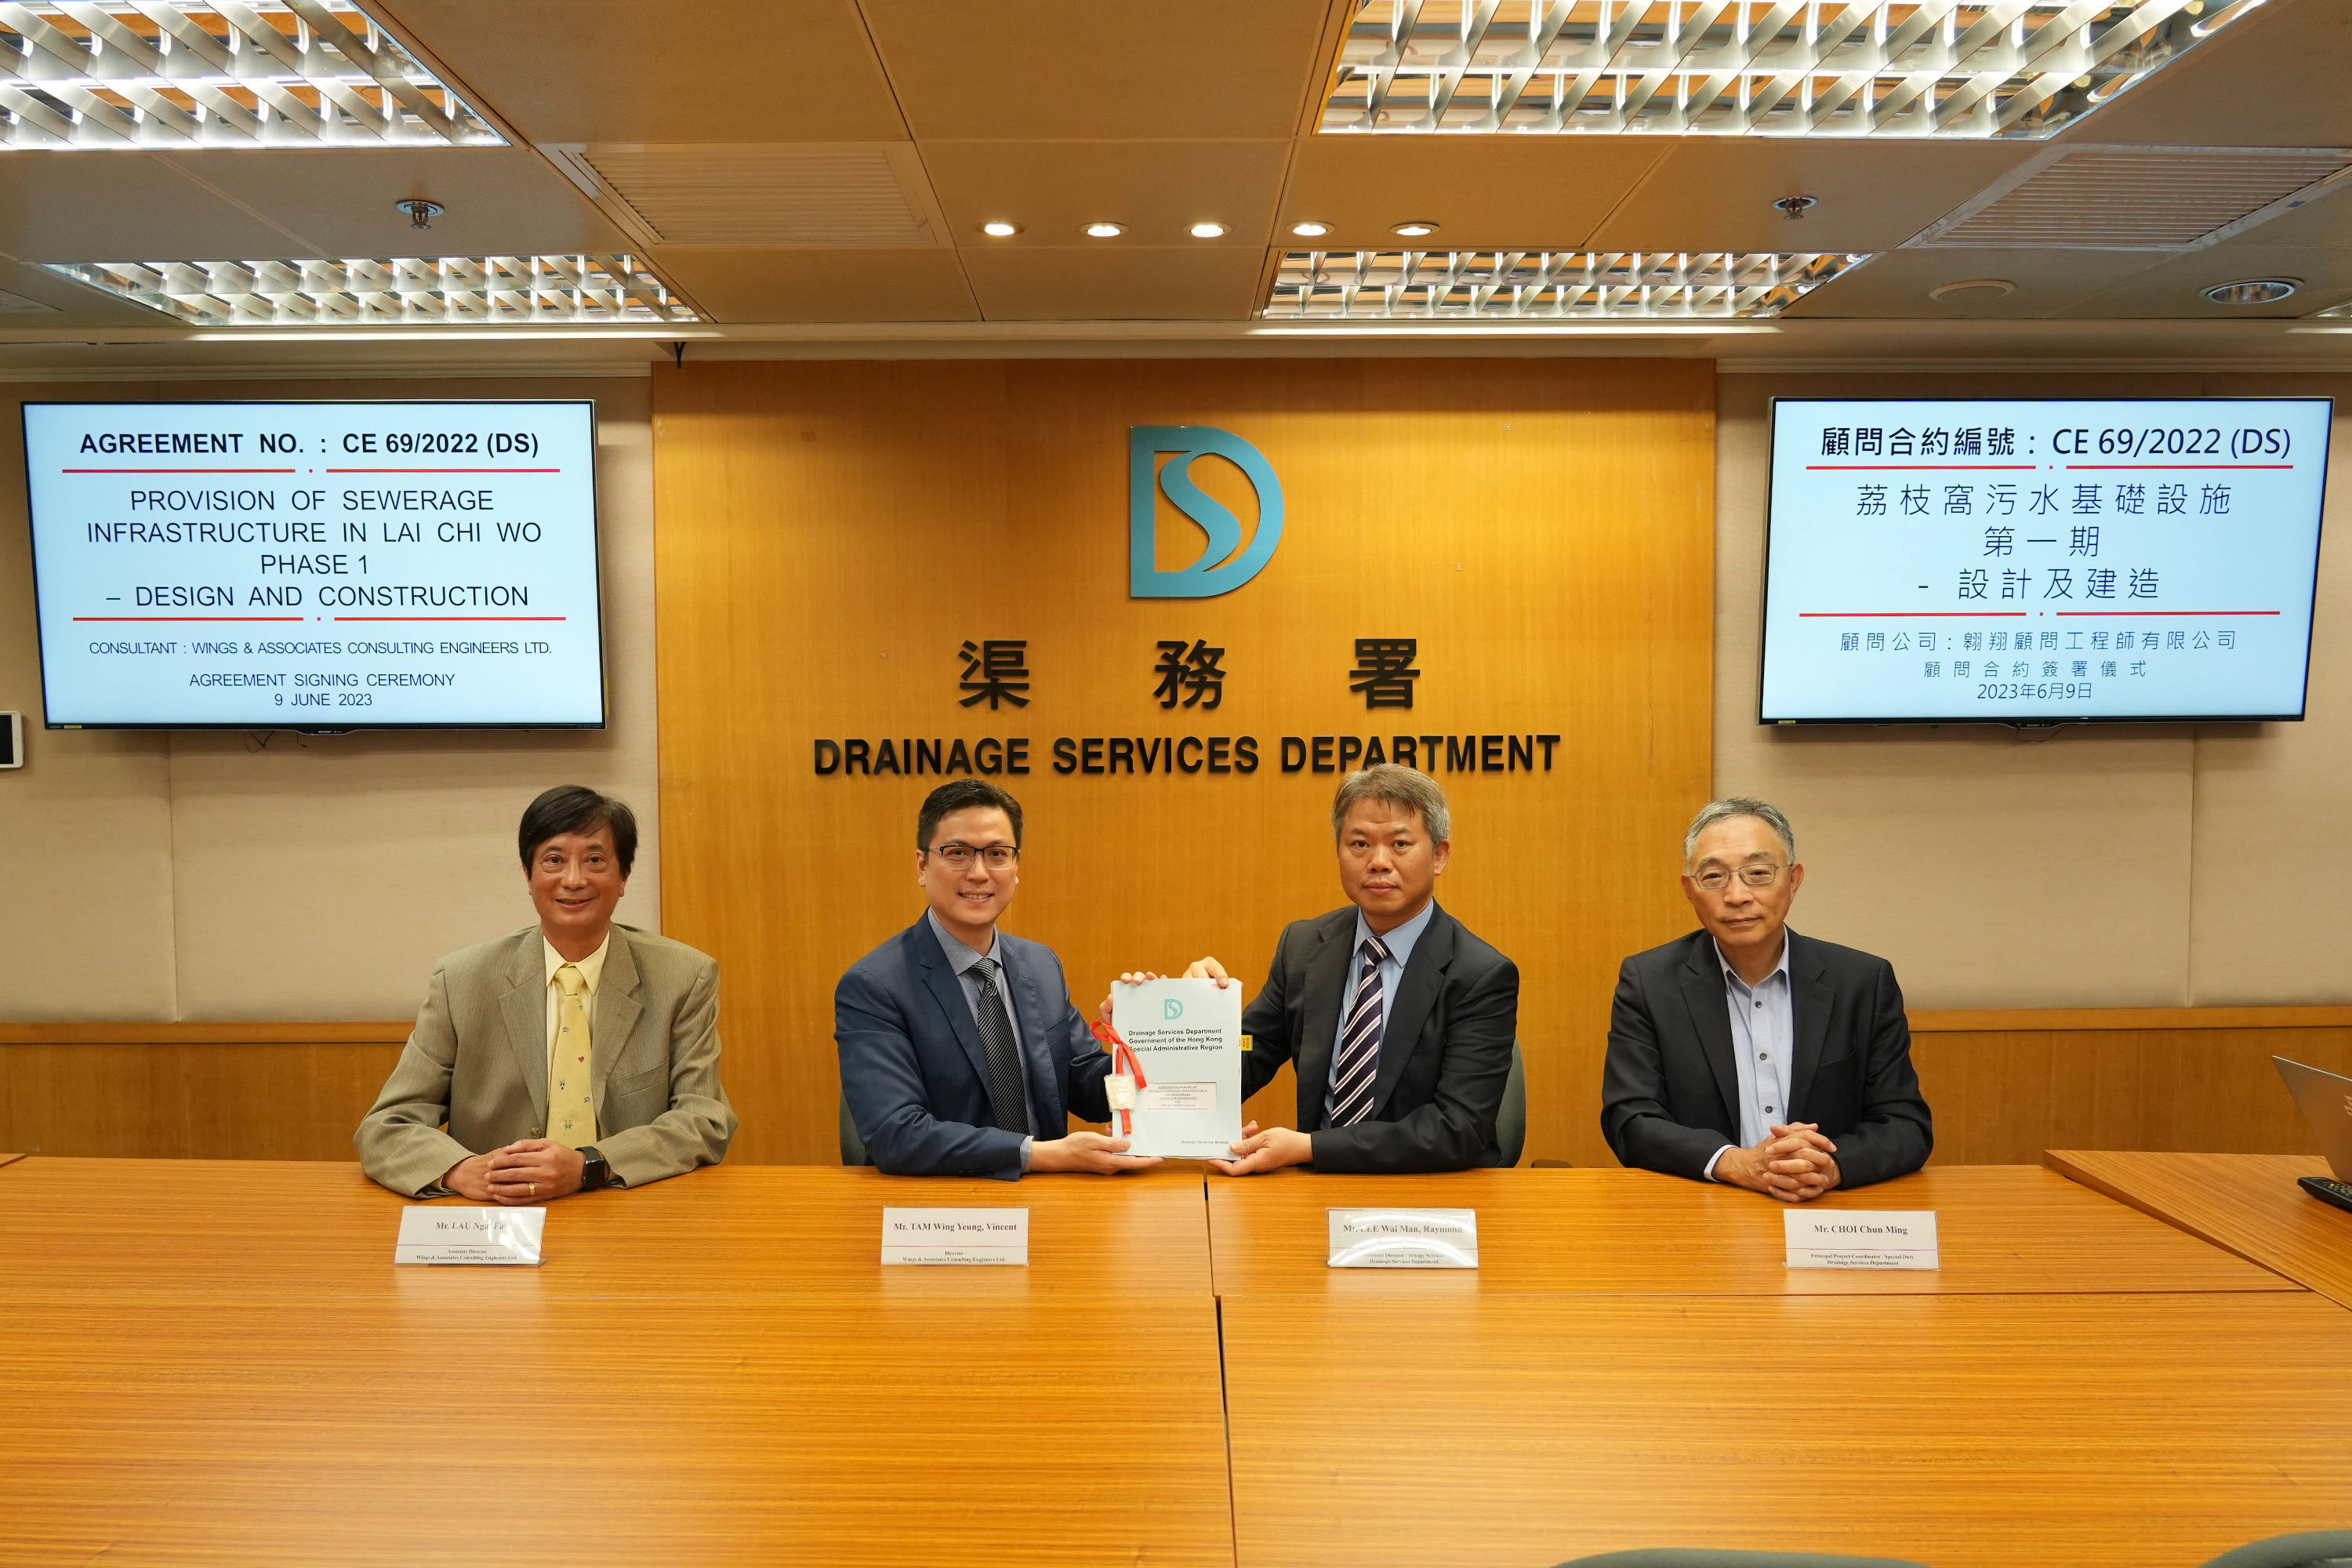 The Assistant Director/Sewage Services, Mr LEE Wai-man, Raymond (second right), Principal Project Coordinator/Special Duty, Mr CHOI Chun-ming (first right) of DSD and the Director, Mr TAM Wing-yeung (second left), Associate Director, Mr LAU Ngai-fai (first left) of Wings & Associates Consulting Engineers Ltd. attended the Agreement Signing Ceremony